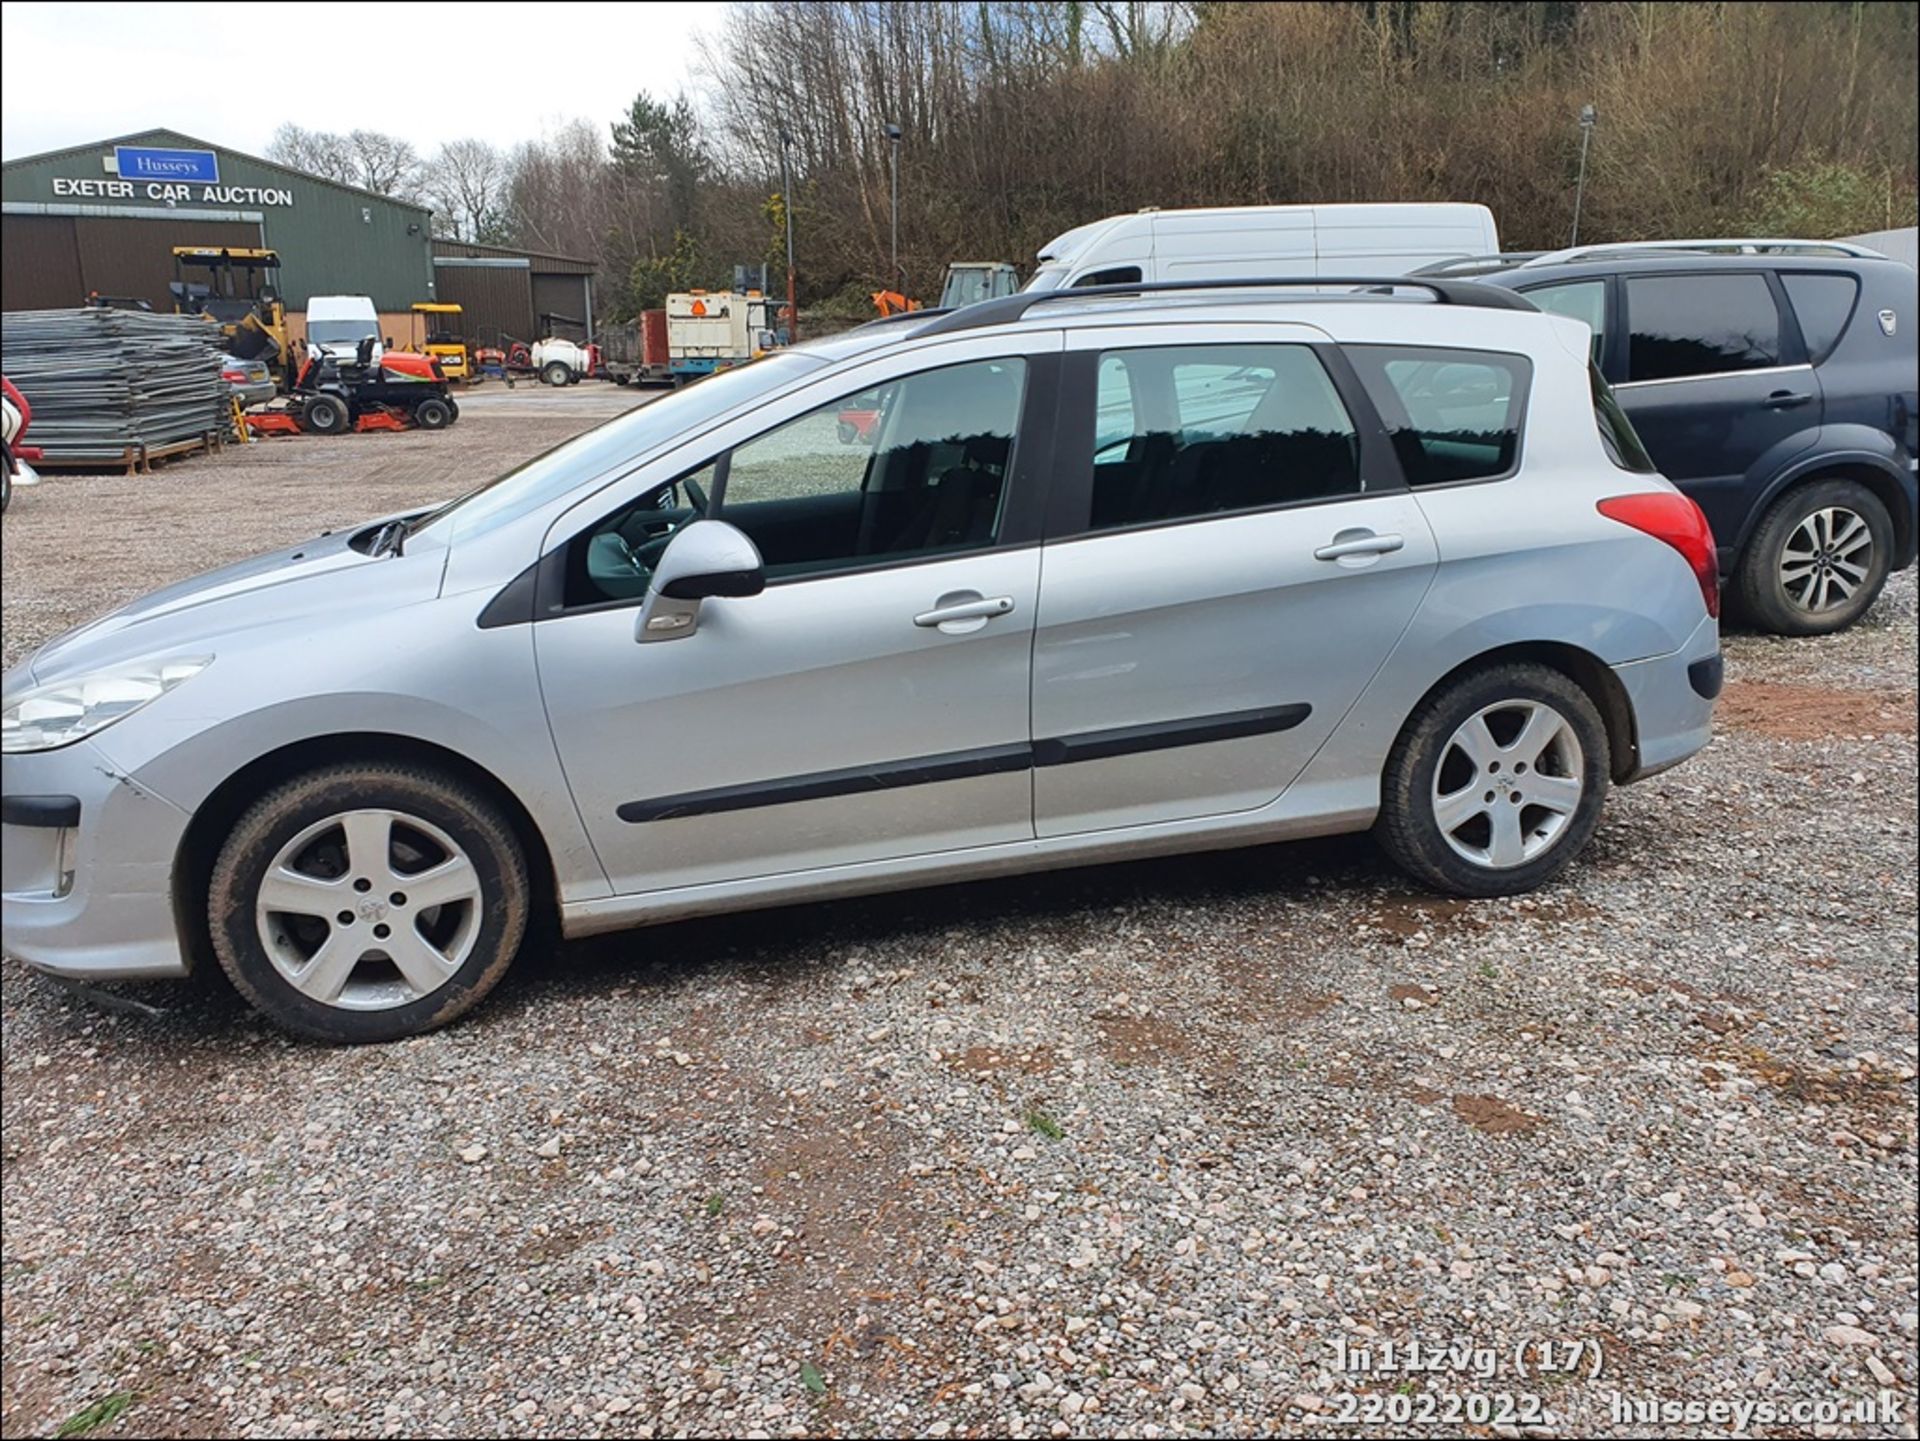 11/11 PEUGEOT 308 S SW HDI 92 - 1560cc 5dr Estate (Silver, 115k) - Image 17 of 46